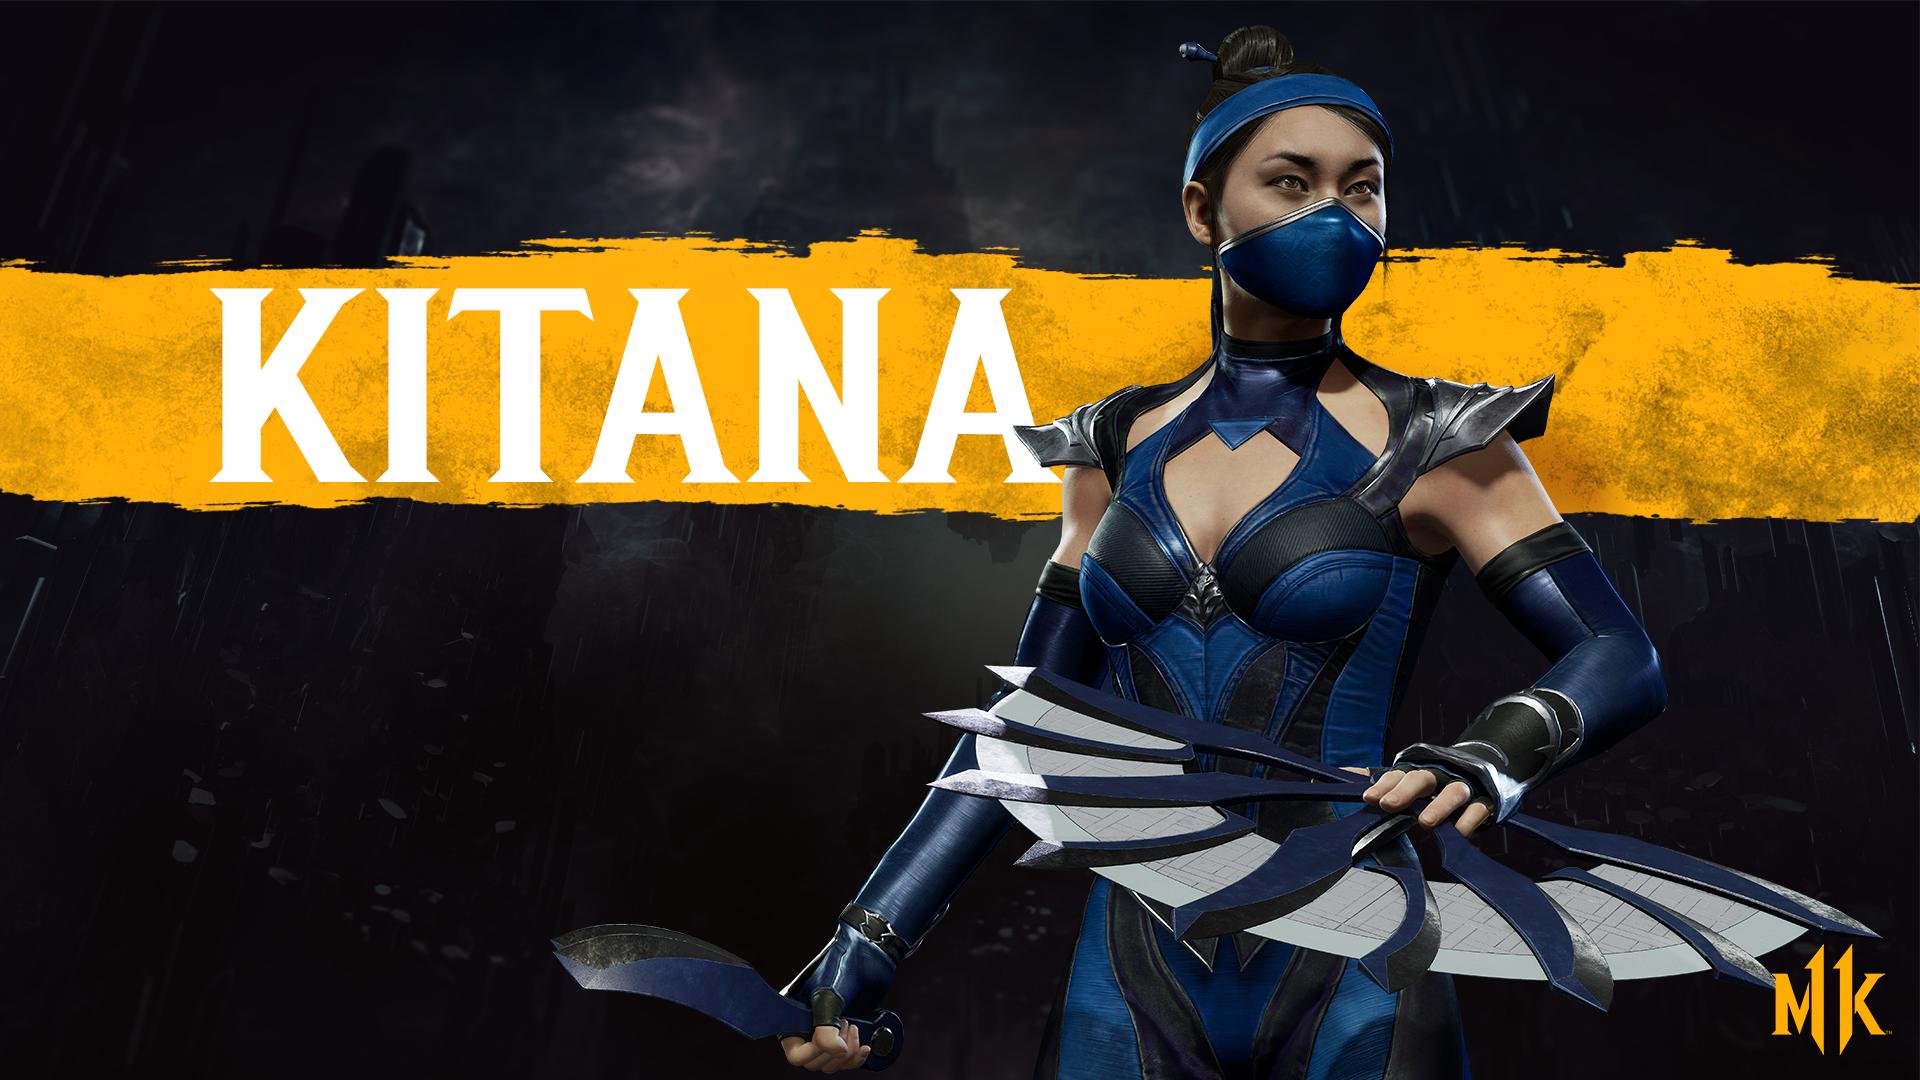 The Ultimate Scientific Ranking Of Every Playable Mortal Kombat Character -  Game Informer